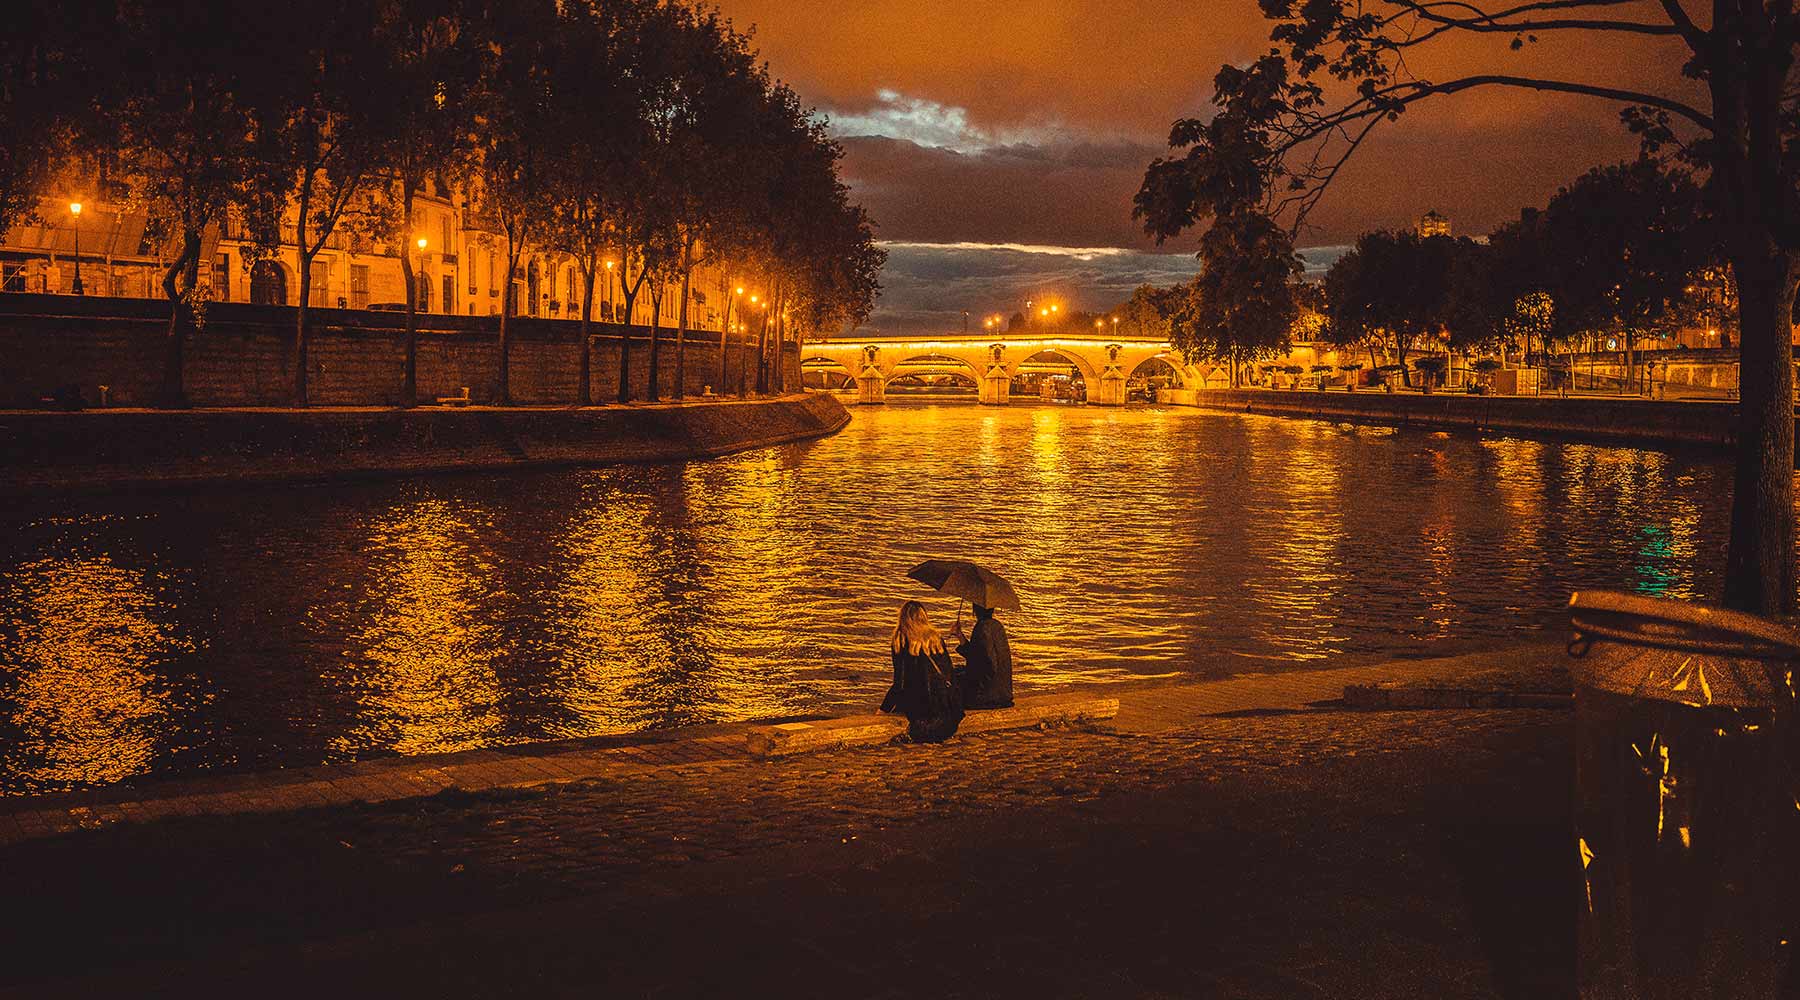 couple seated together at edge of seine river Paris at golden hour riverbank lamps lit